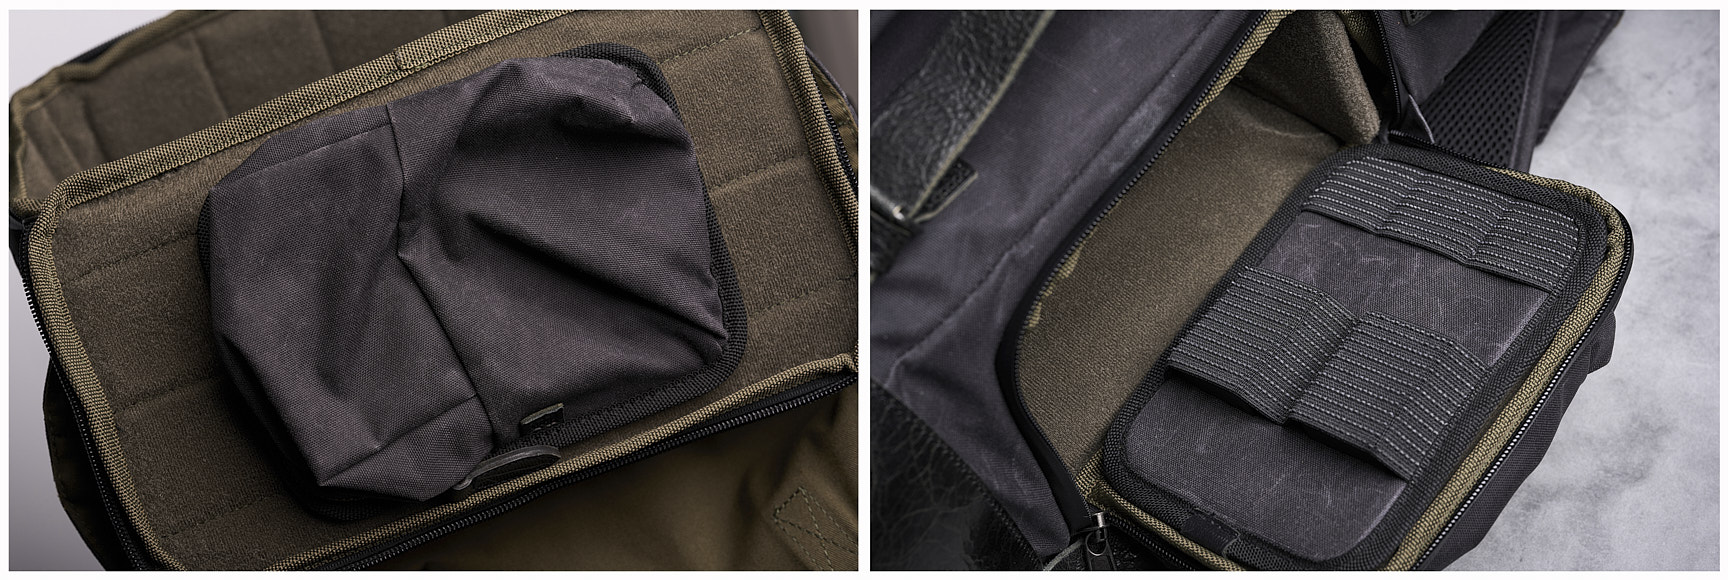 The velcro modules are interchangeable between bags. These were from my Nomad bag.